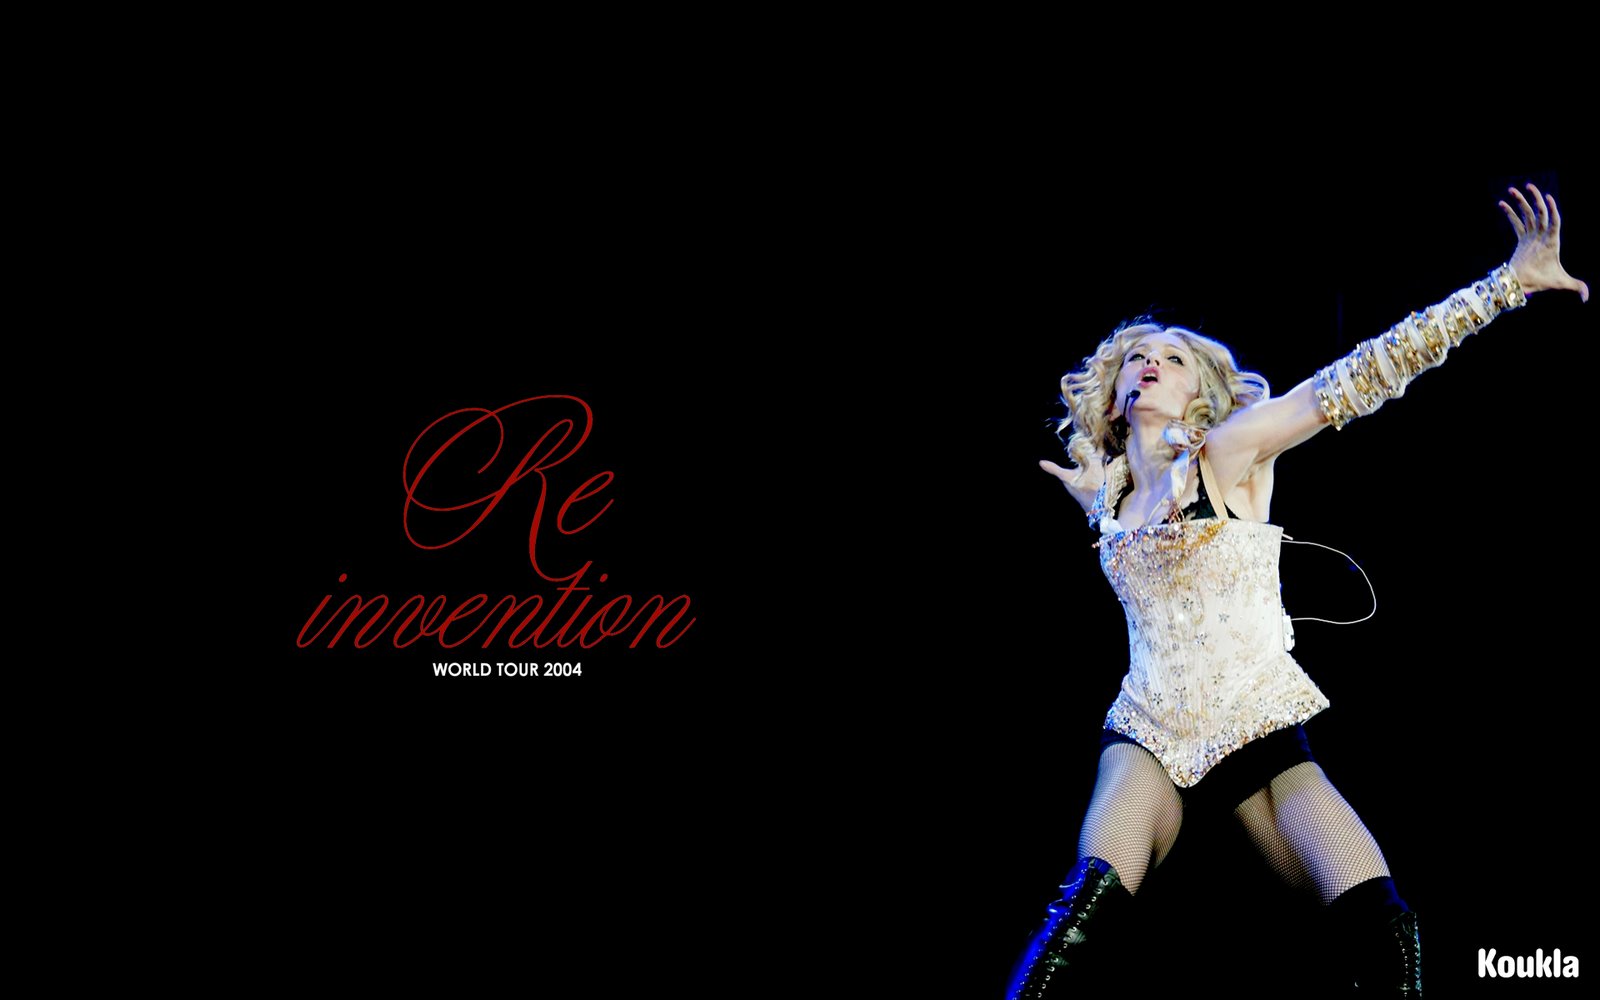 Re Invention Tour Wallpaper Madonna Fanmade Artworks